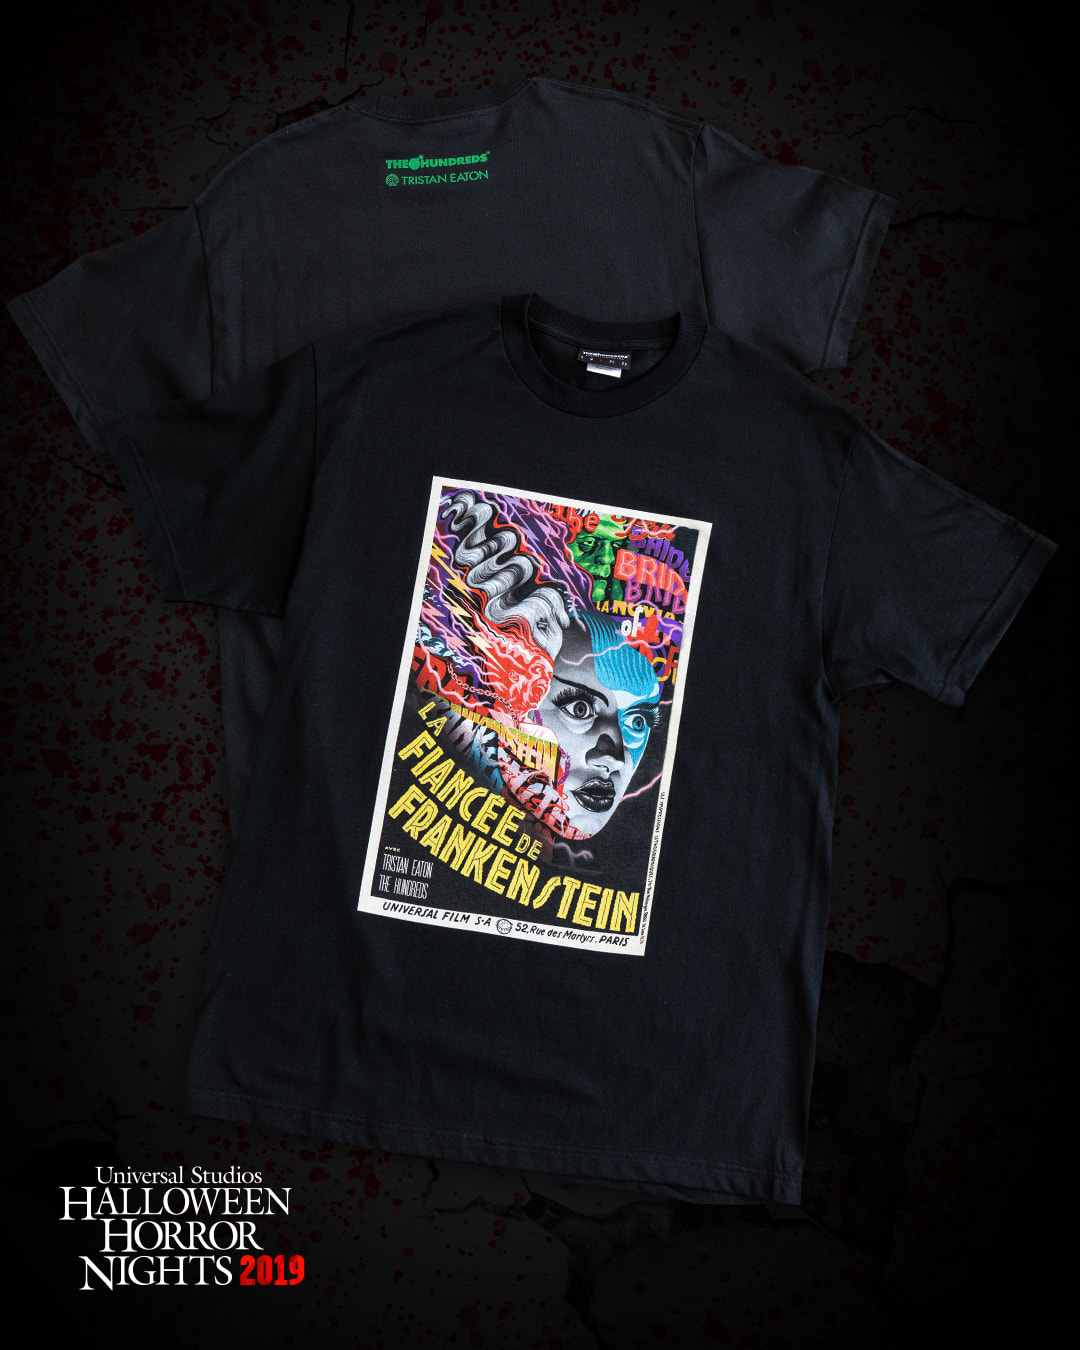 New food and merchandise for Halloween Horror Nights